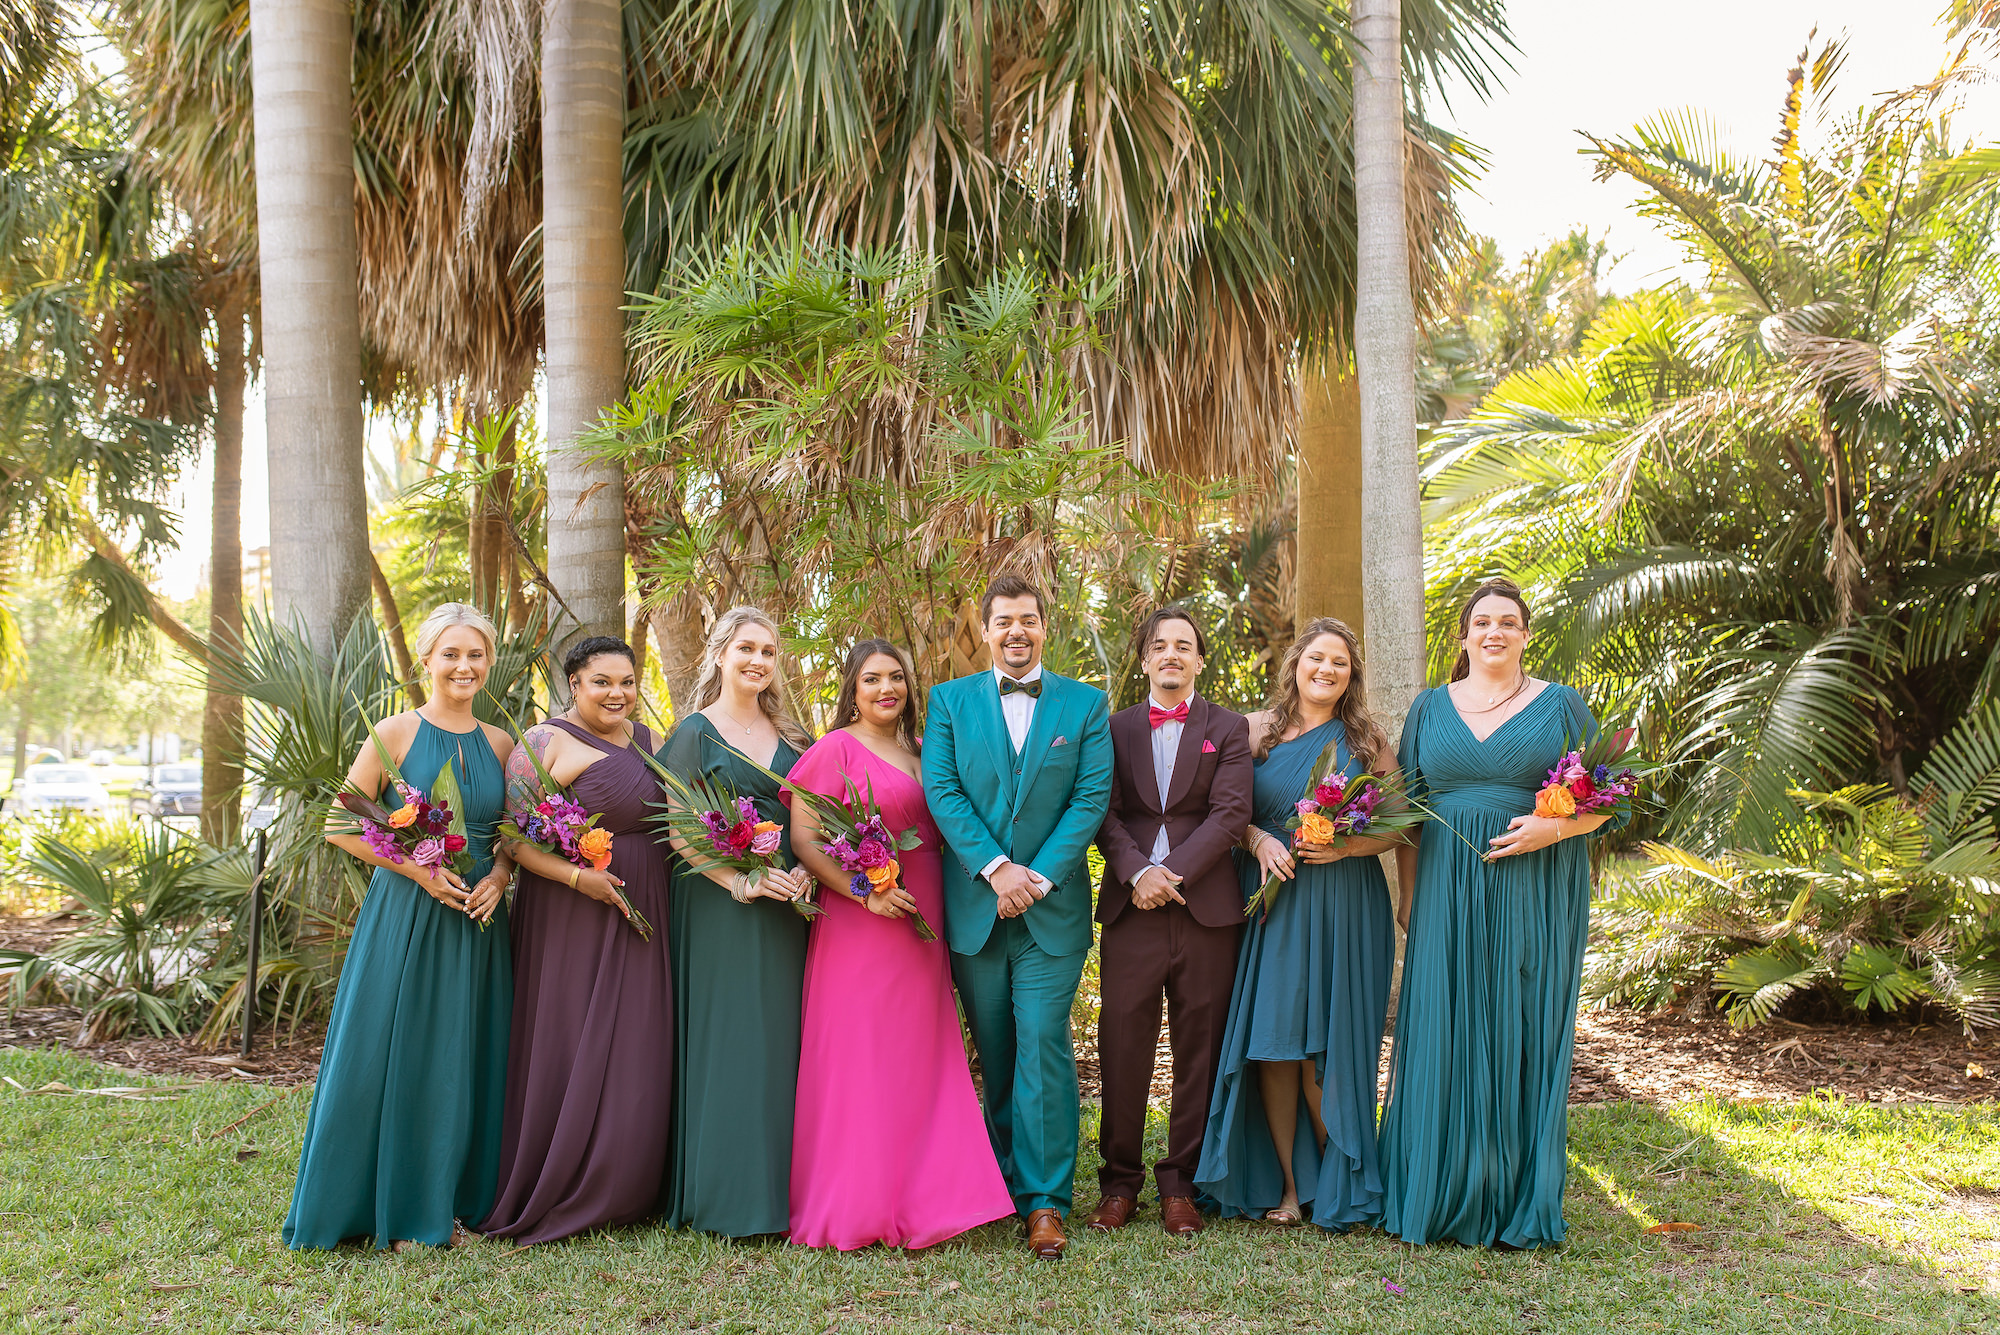 Groom with Wedding Party in Jewel Toned Bridesmaids and Groomsmen's Suits | Florida Wedding Photographer Kristen Marie Photography